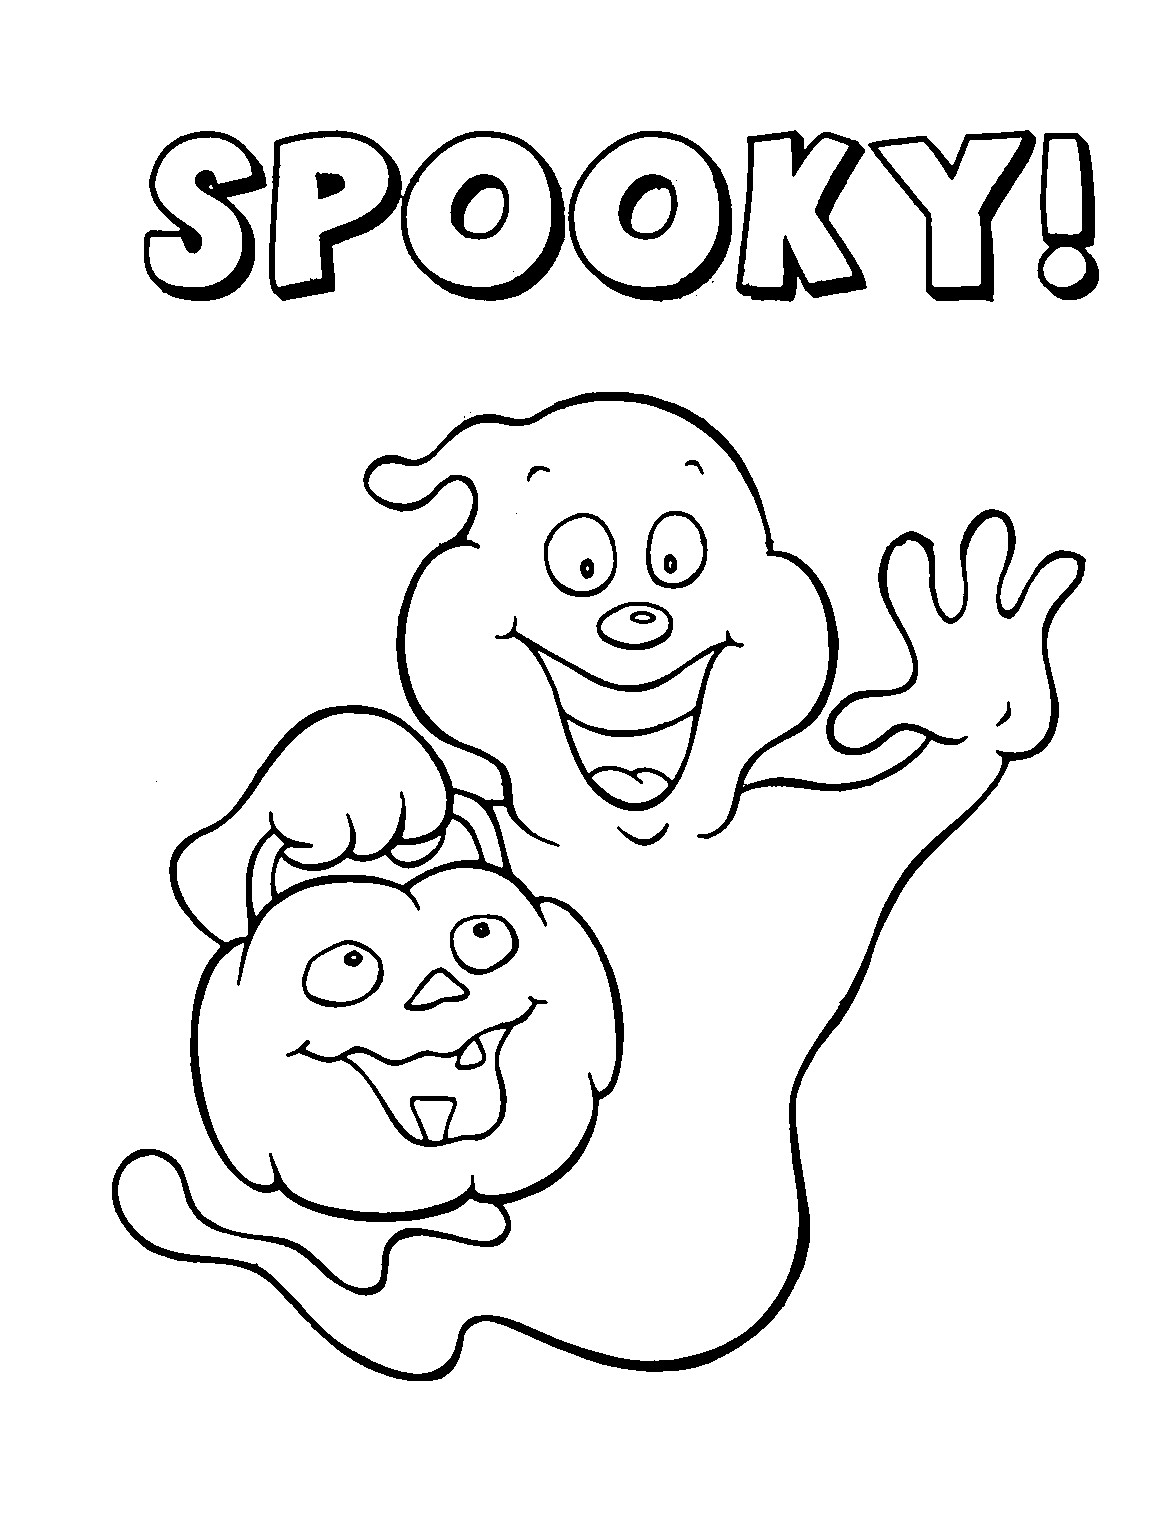 Halloween Coloring Pages For Toddlers
 50 Free Printable Halloween Coloring Pages For Kids